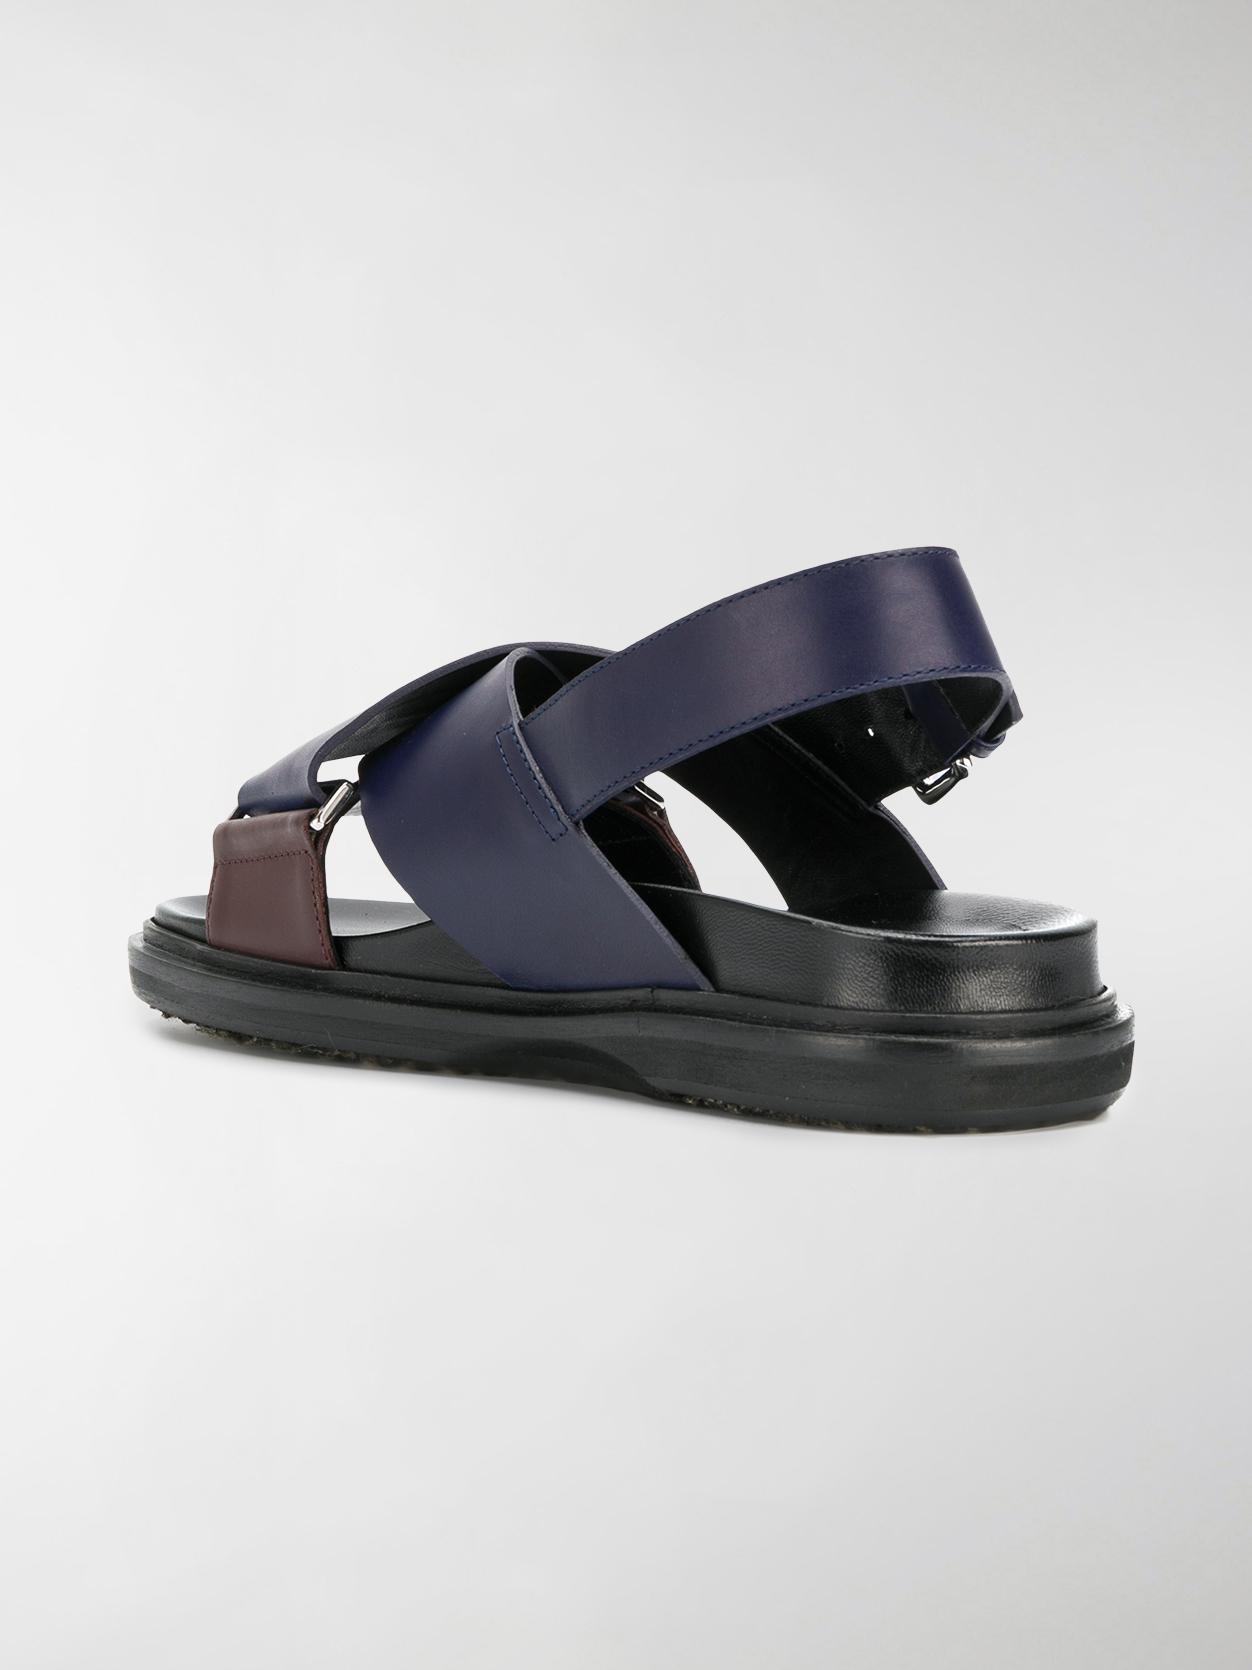 Marni Leather Crossover Fussbett Sandals in Blue - Lyst